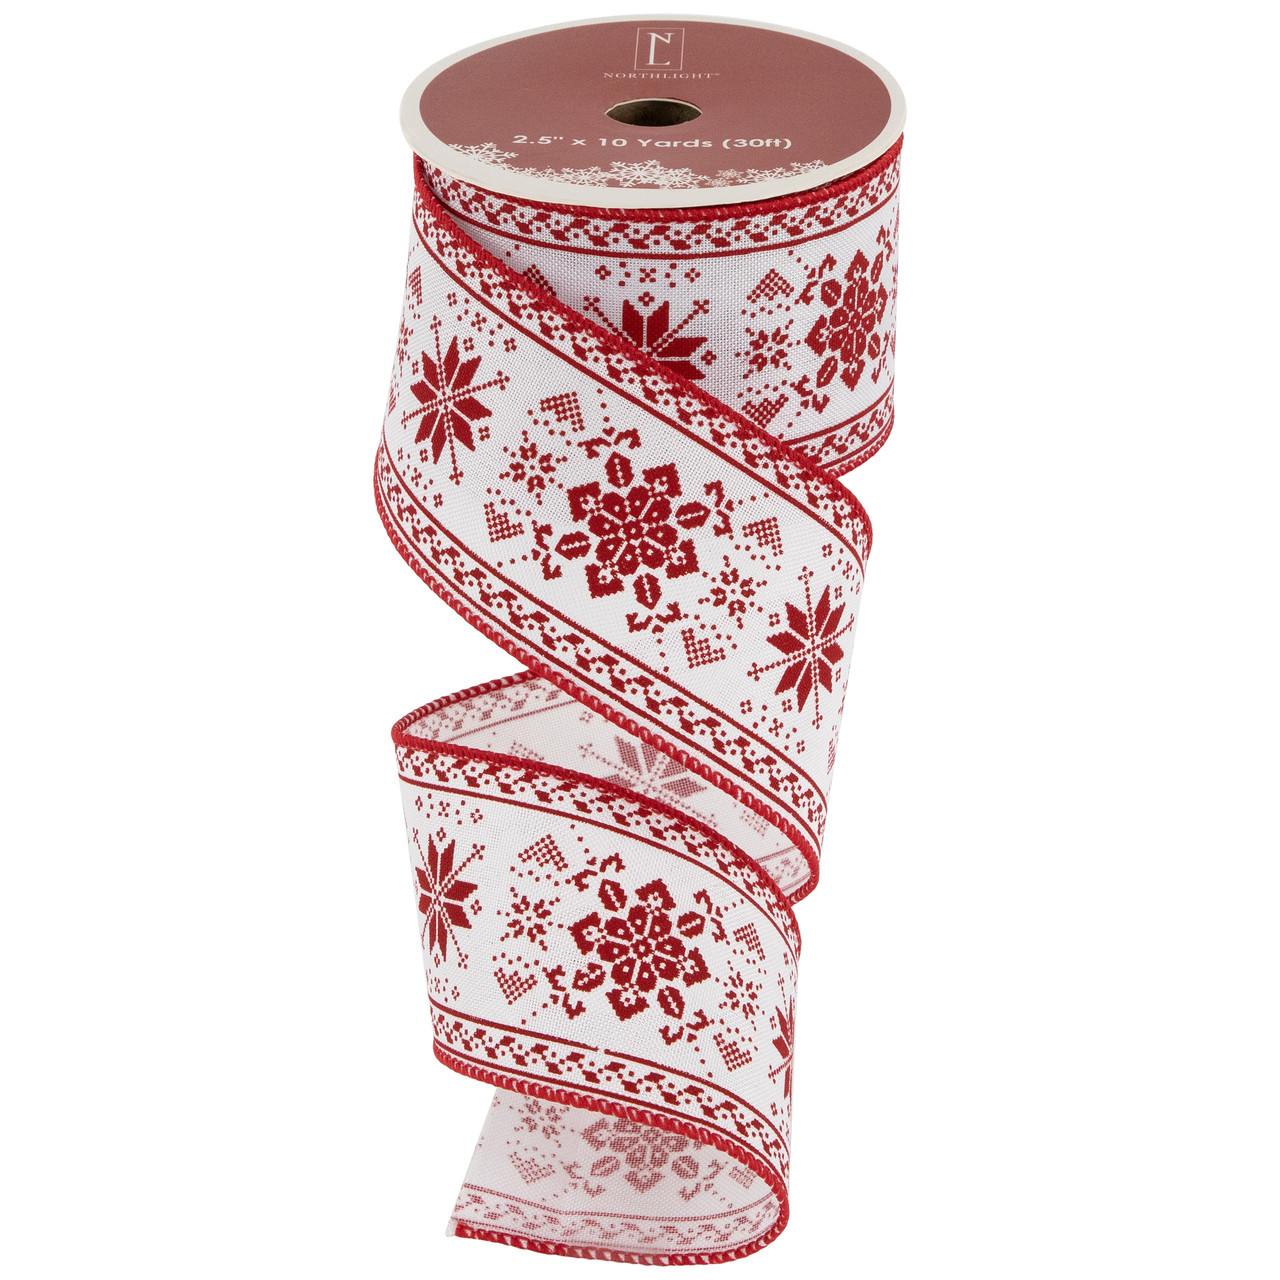 Northlight White and Red Glitter Hearts Valentine's Day Wired Craft Ribbon 2.5 inch x 10 Yards